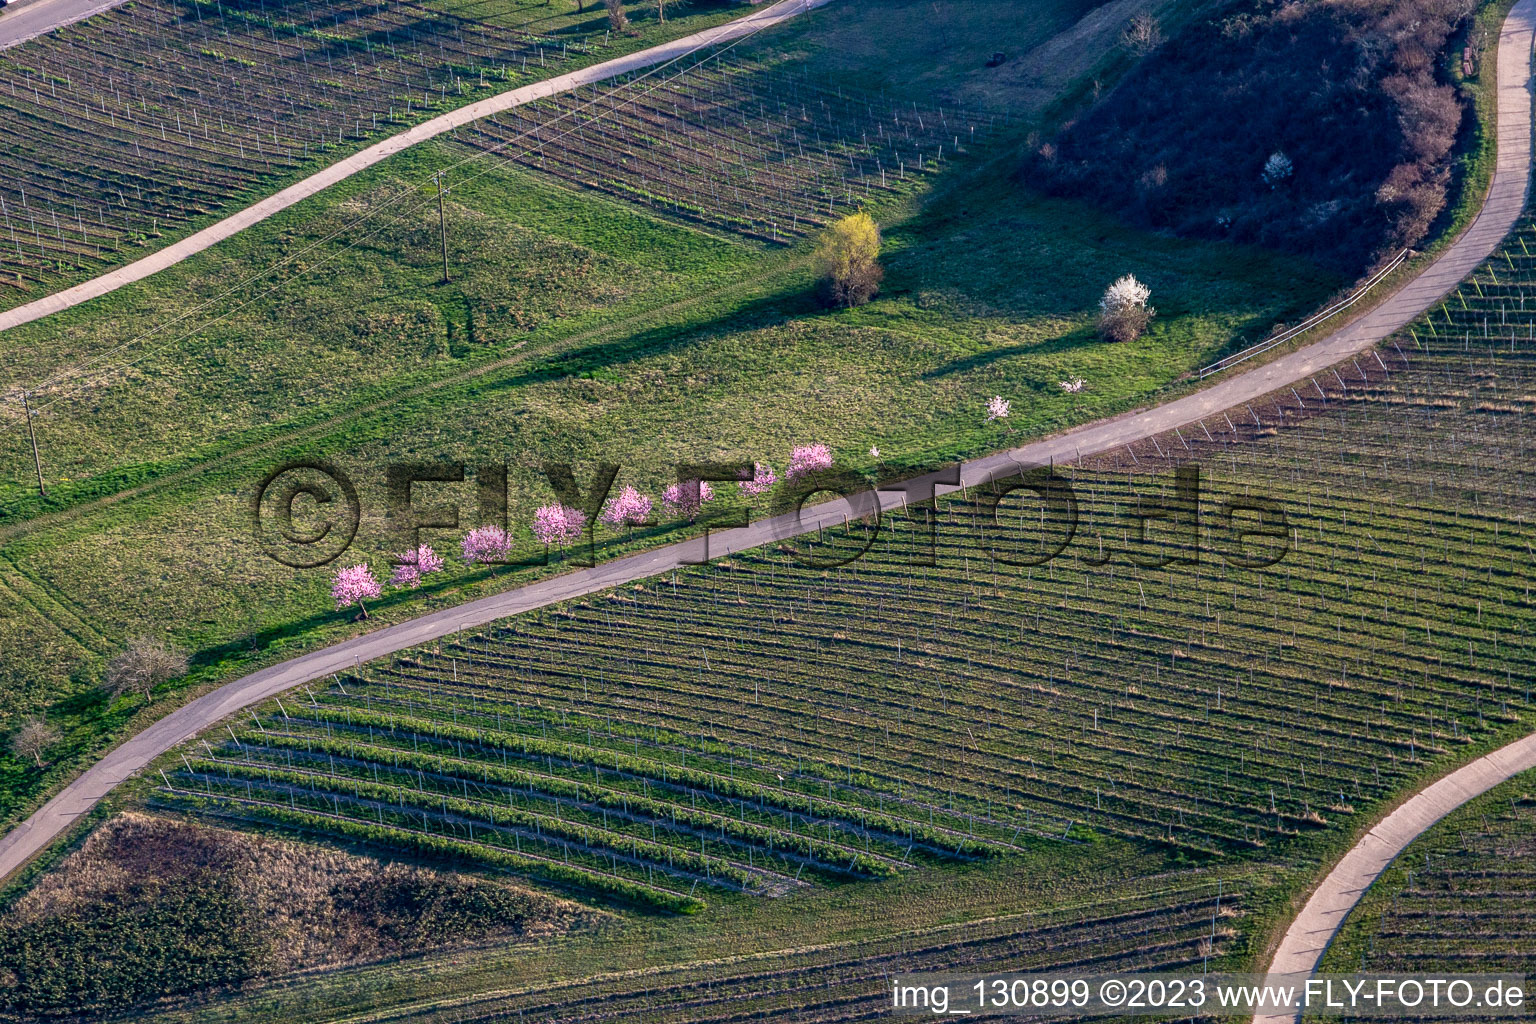 Aerial view of Almond blossom on the southern wine route at Klingenmünster in Klingenmünster in the state Rhineland-Palatinate, Germany